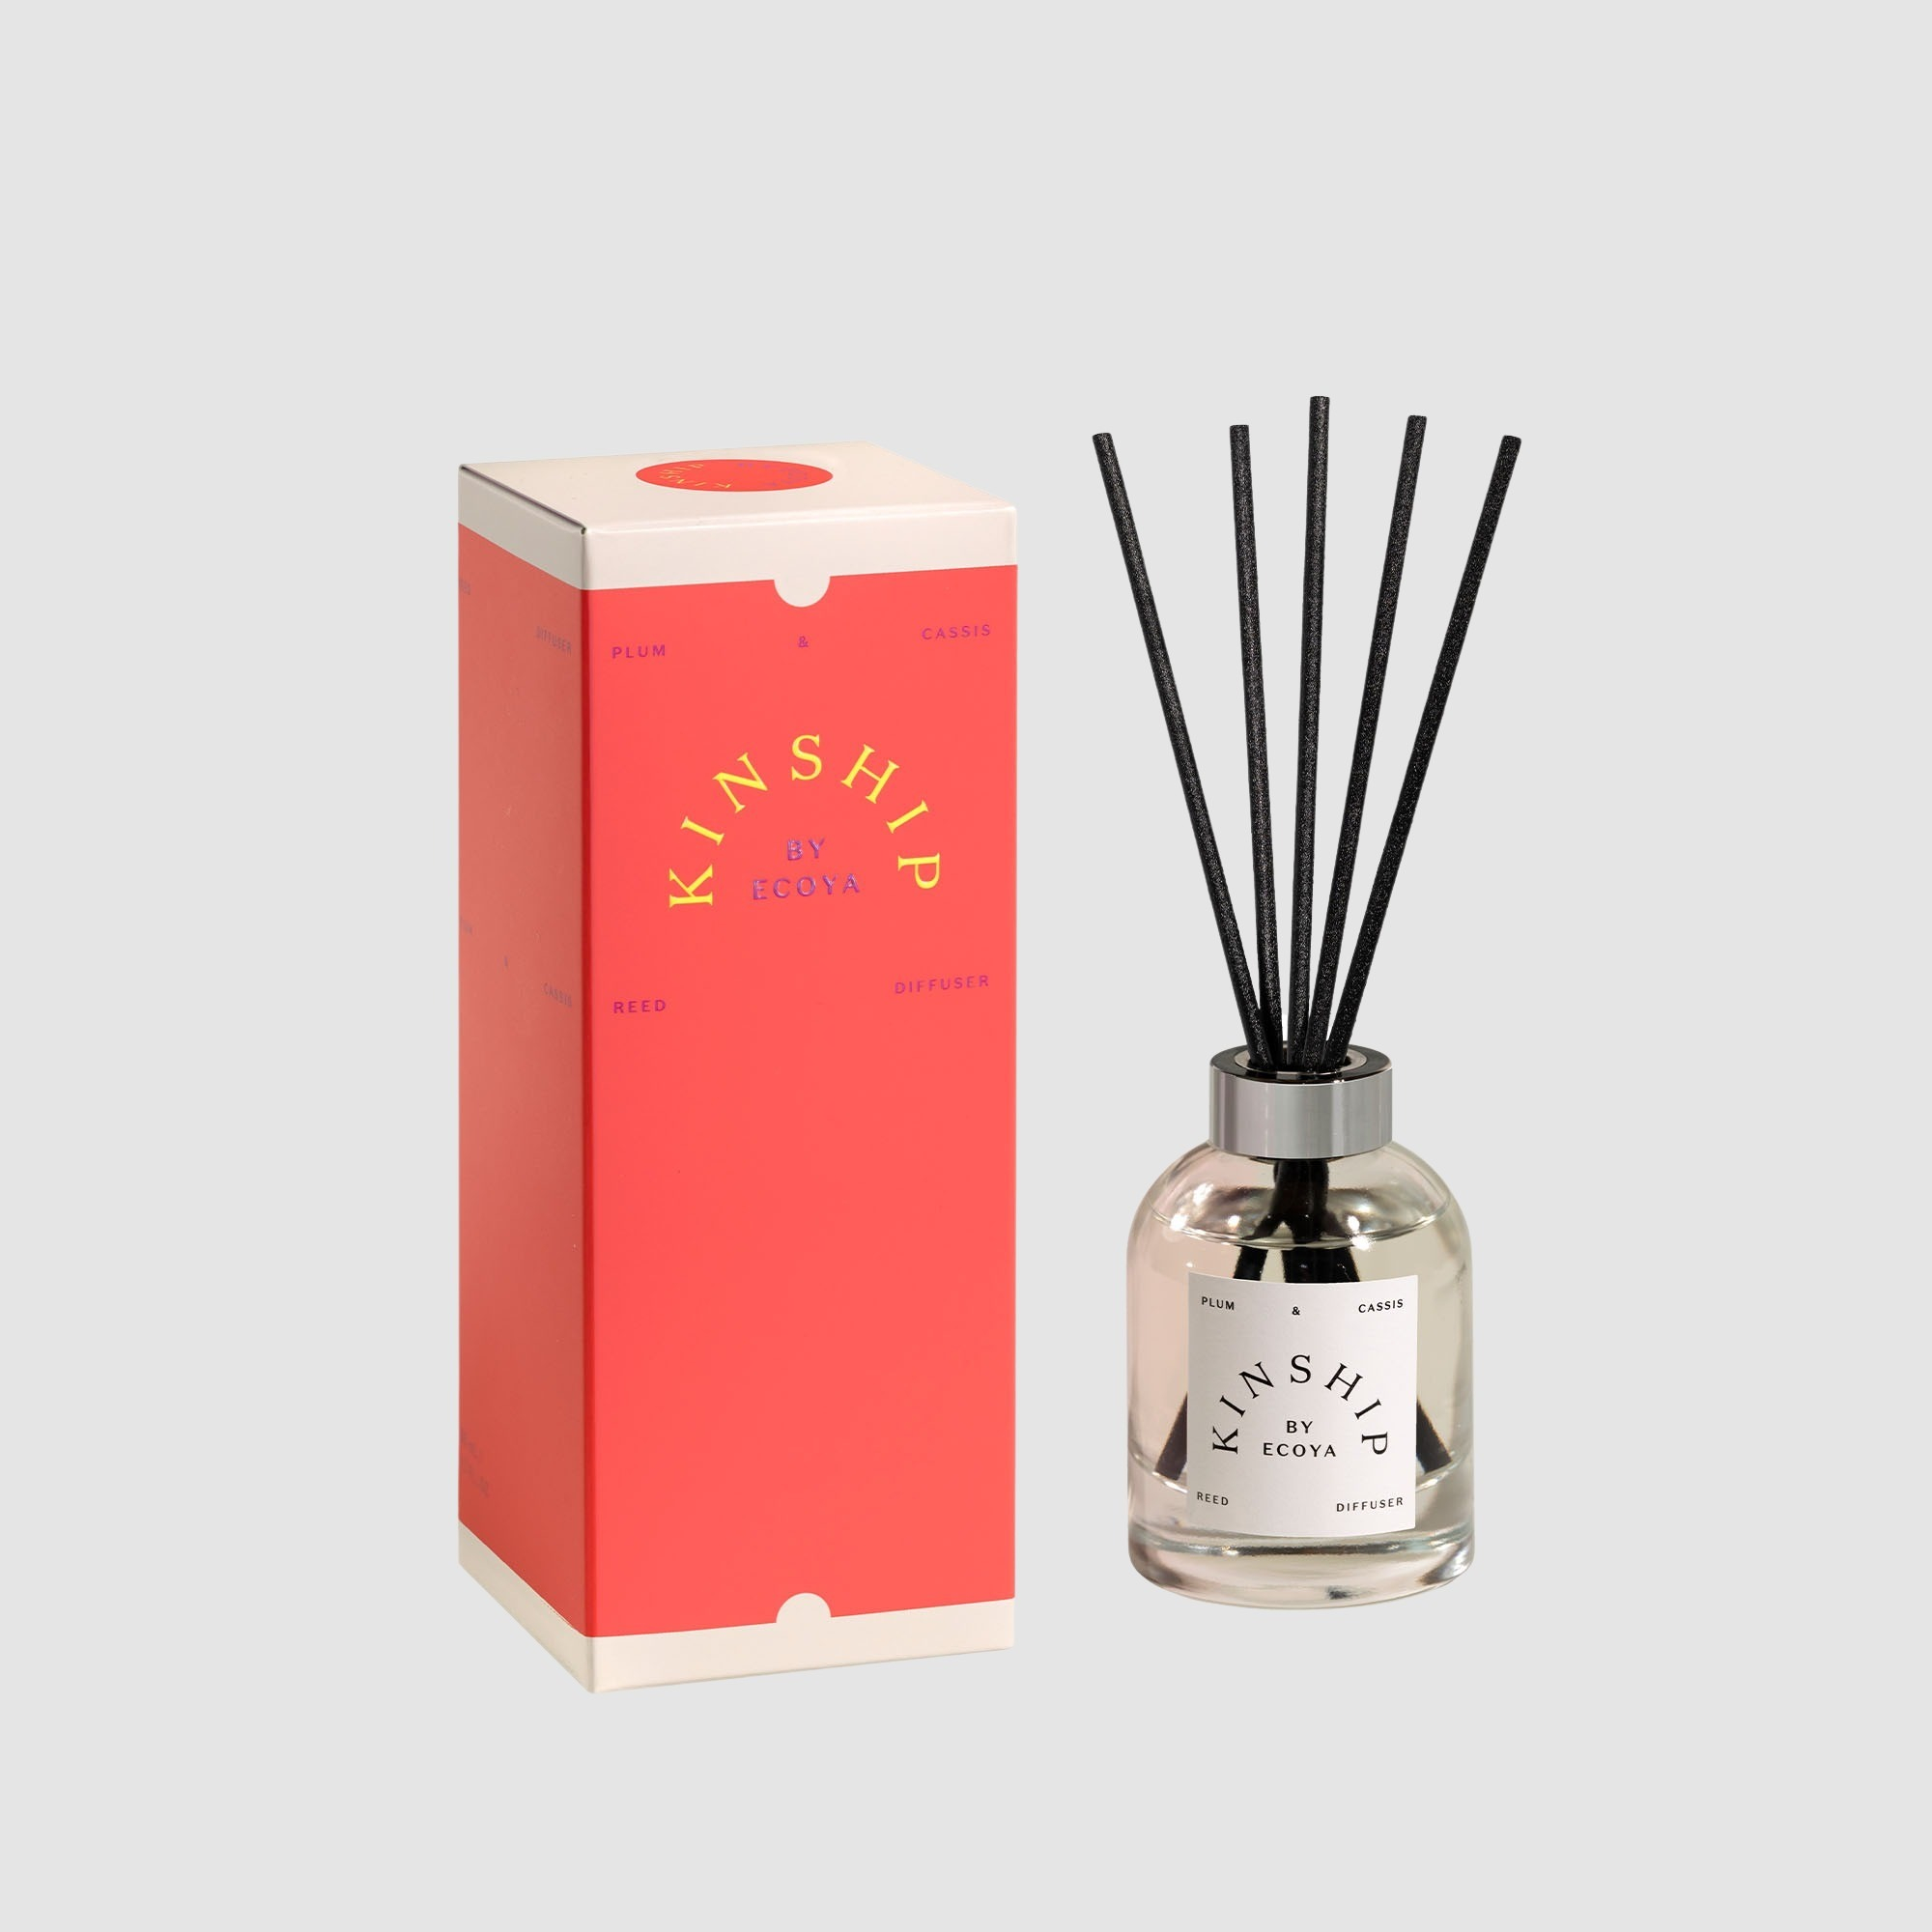 Kinship by Ecoya Plum & Cassis Reed Diffuser 50ml